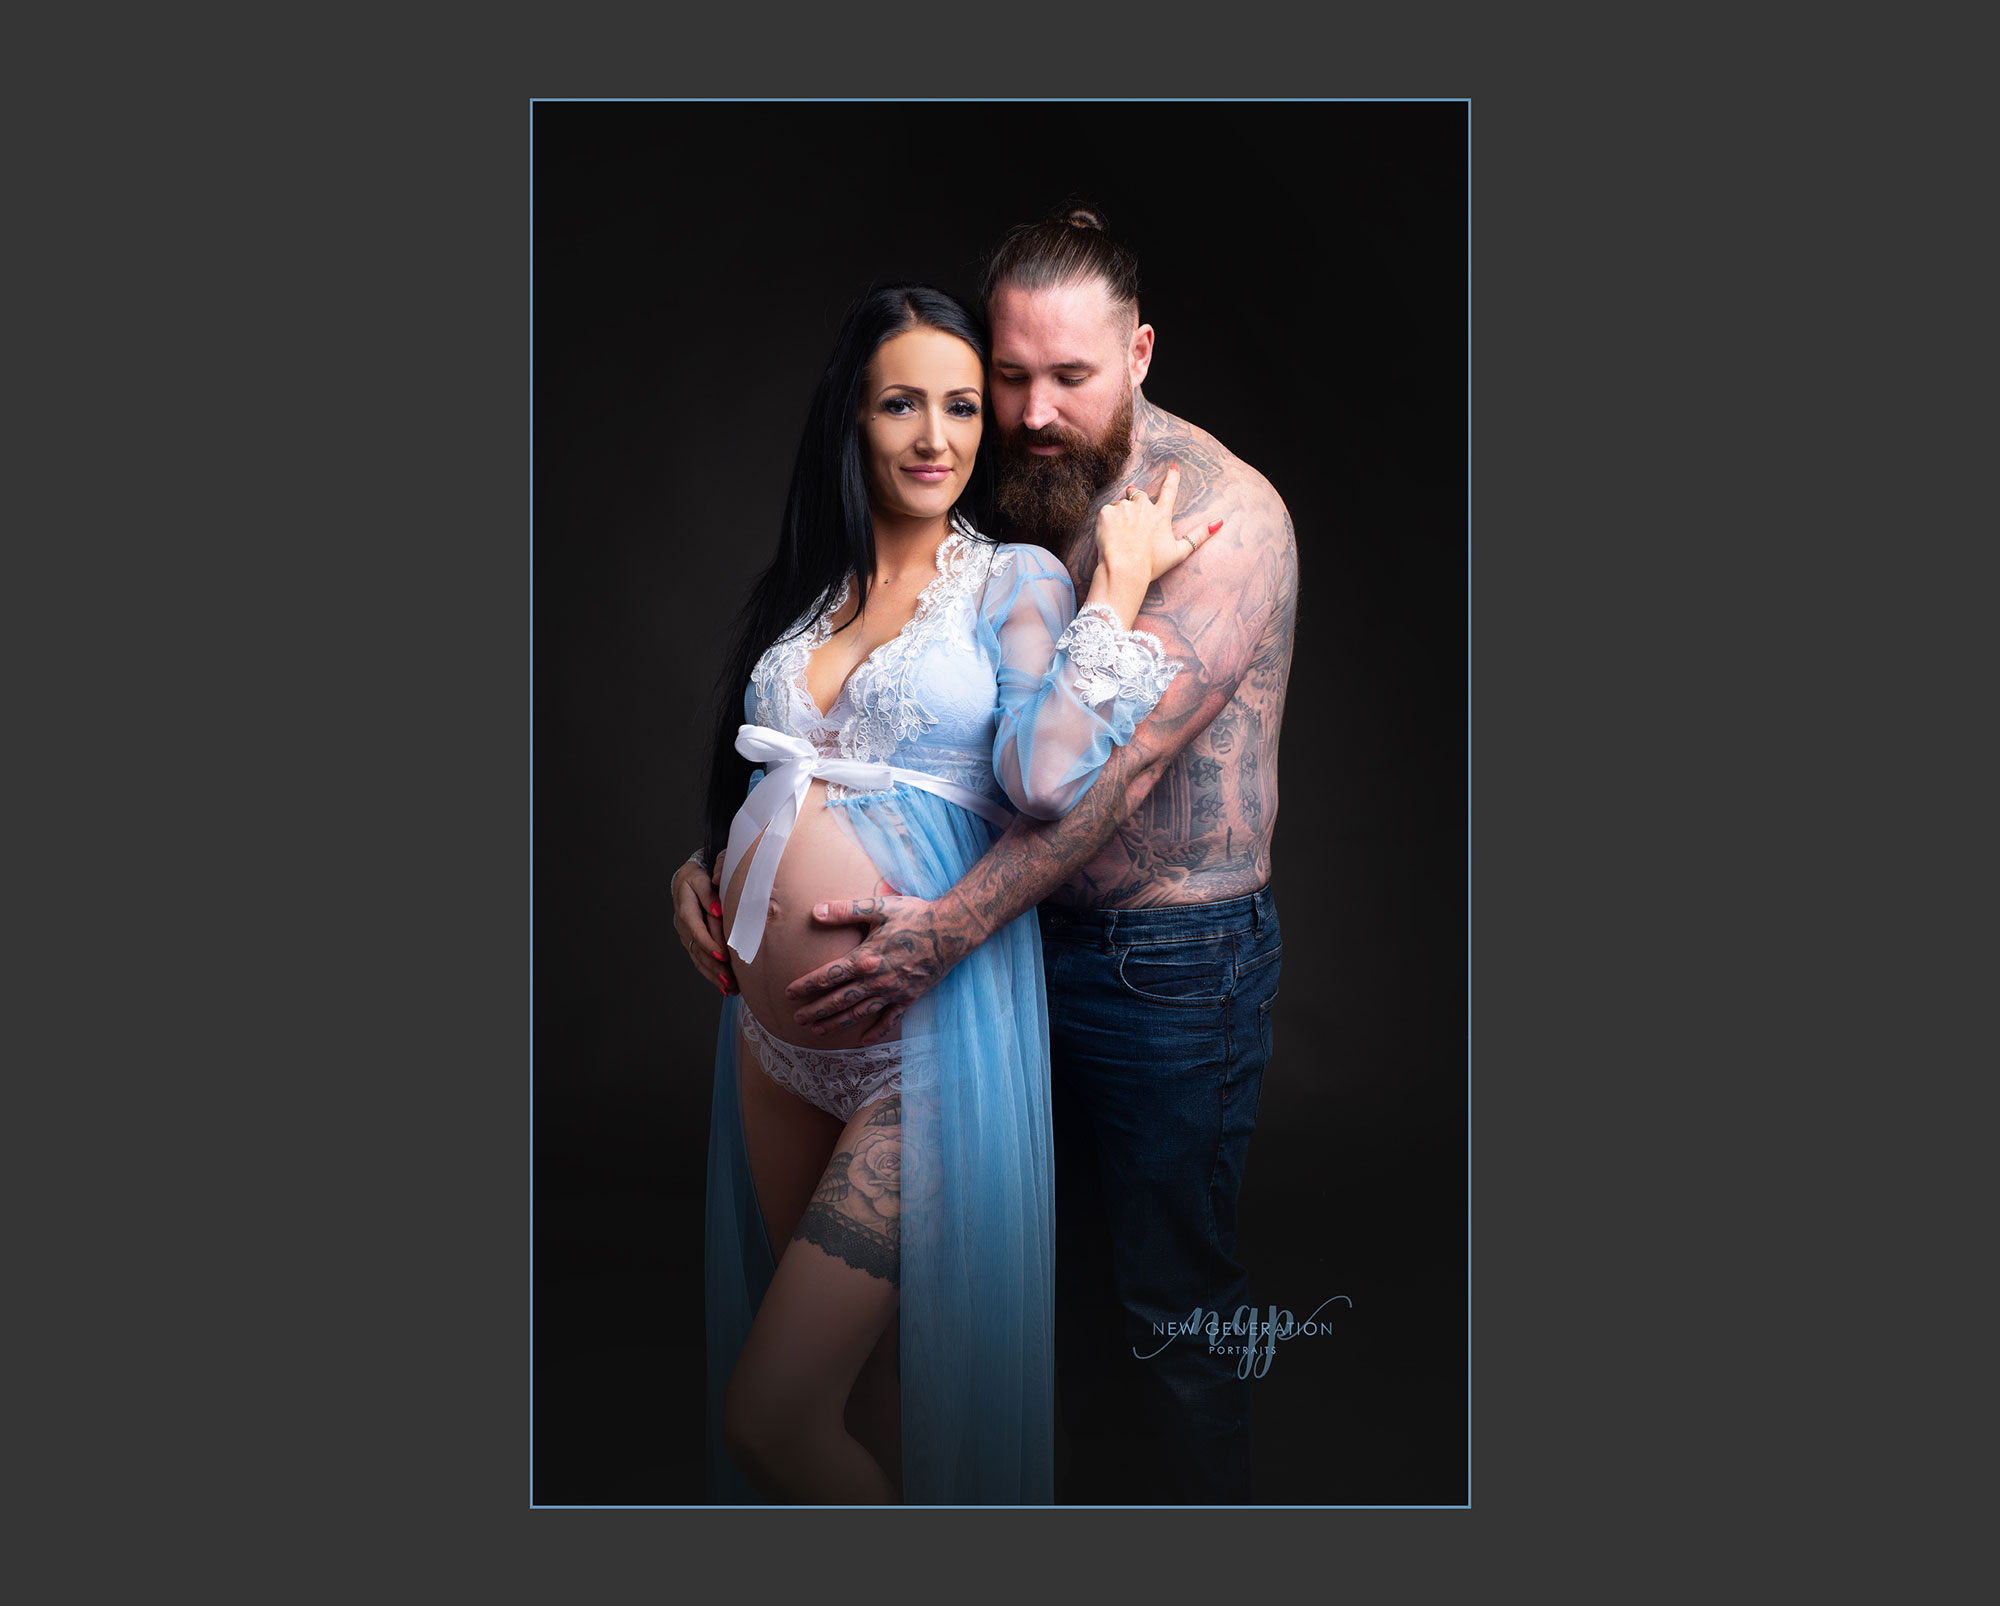 Couples boudoir maternity. Dad holding mum tummy from behind. Captured by New Generation Portraits